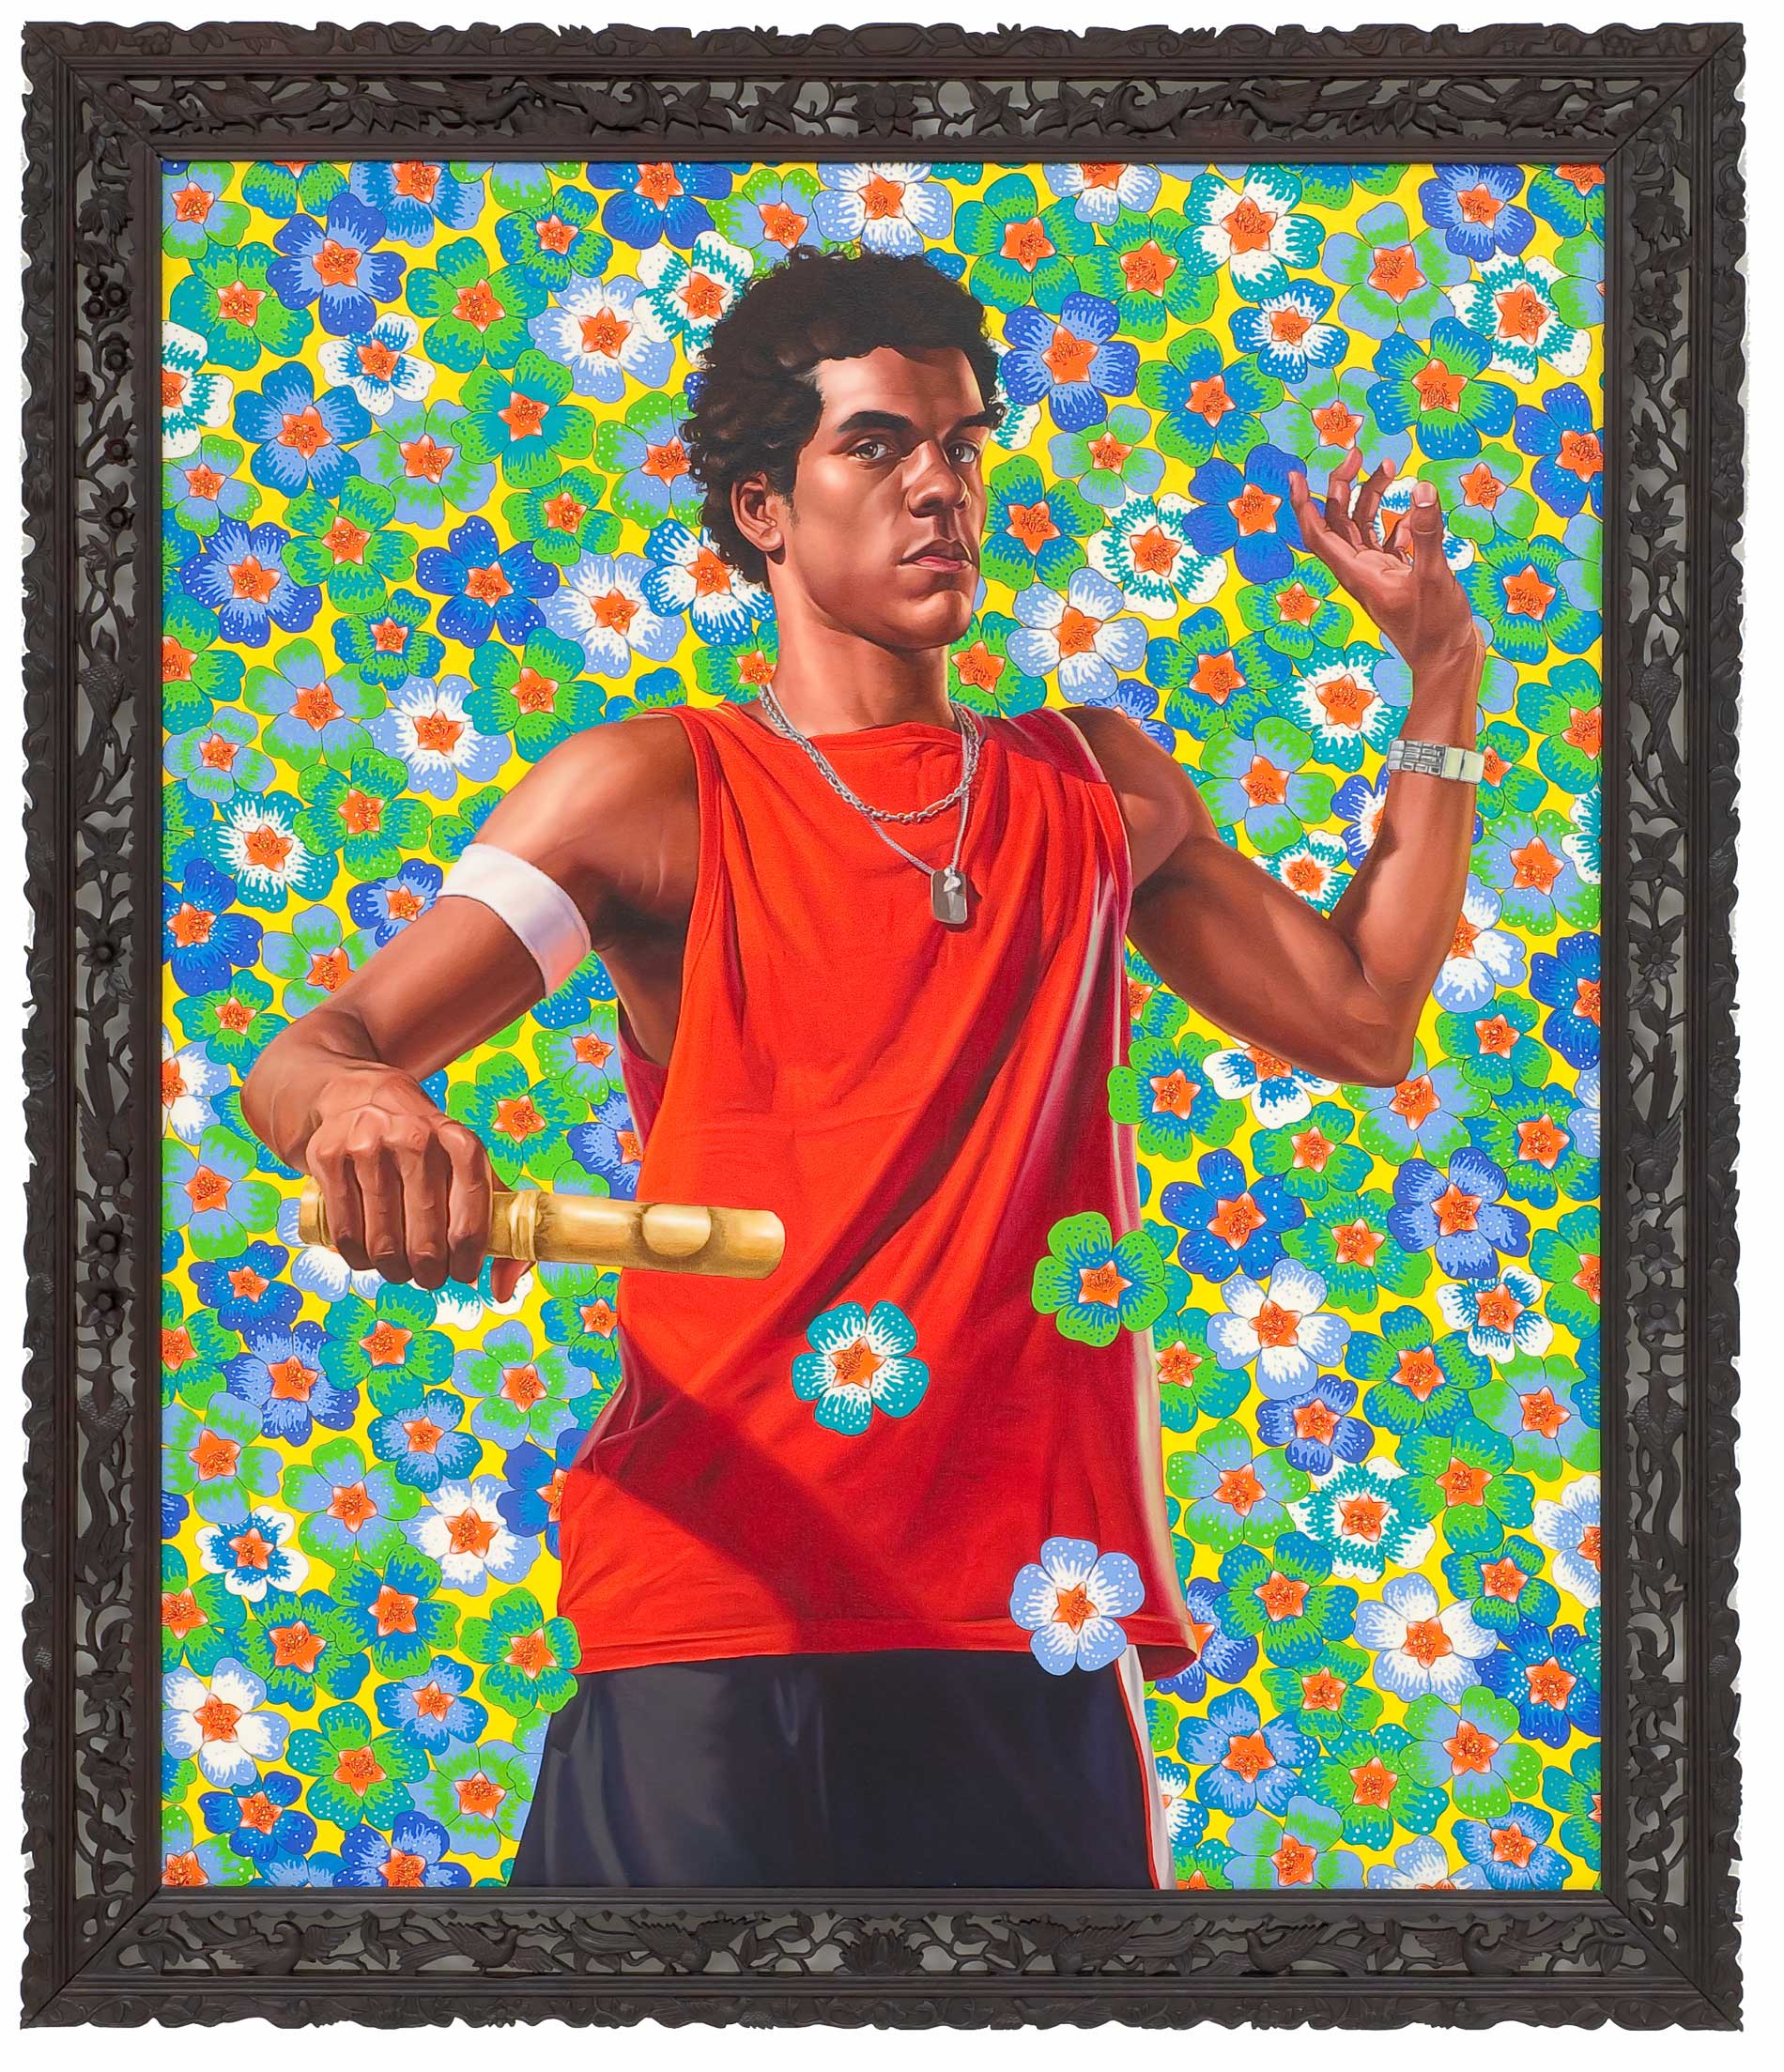 Kehinde Wiley | The World Stage: Brazil | Joao Caetano, 2009 Oil on Canvas. | 8